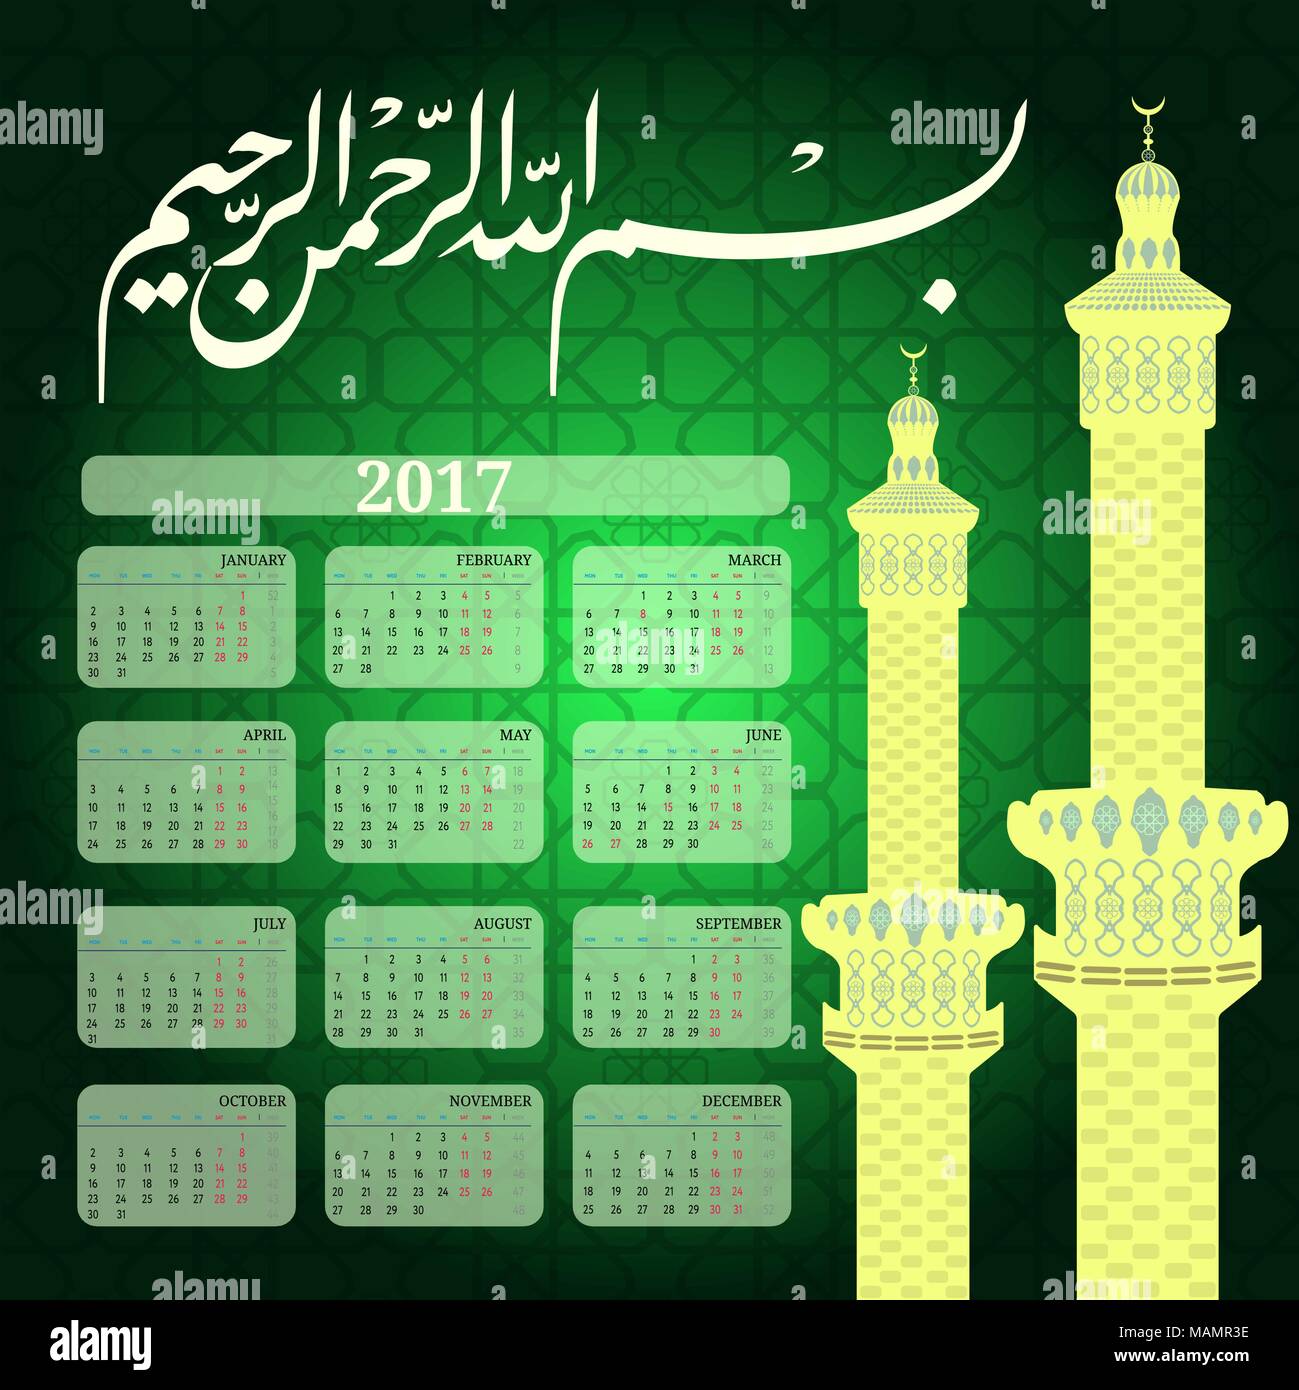 Calendar Islam 2017 Malaysia / You can also see which islamic month today.